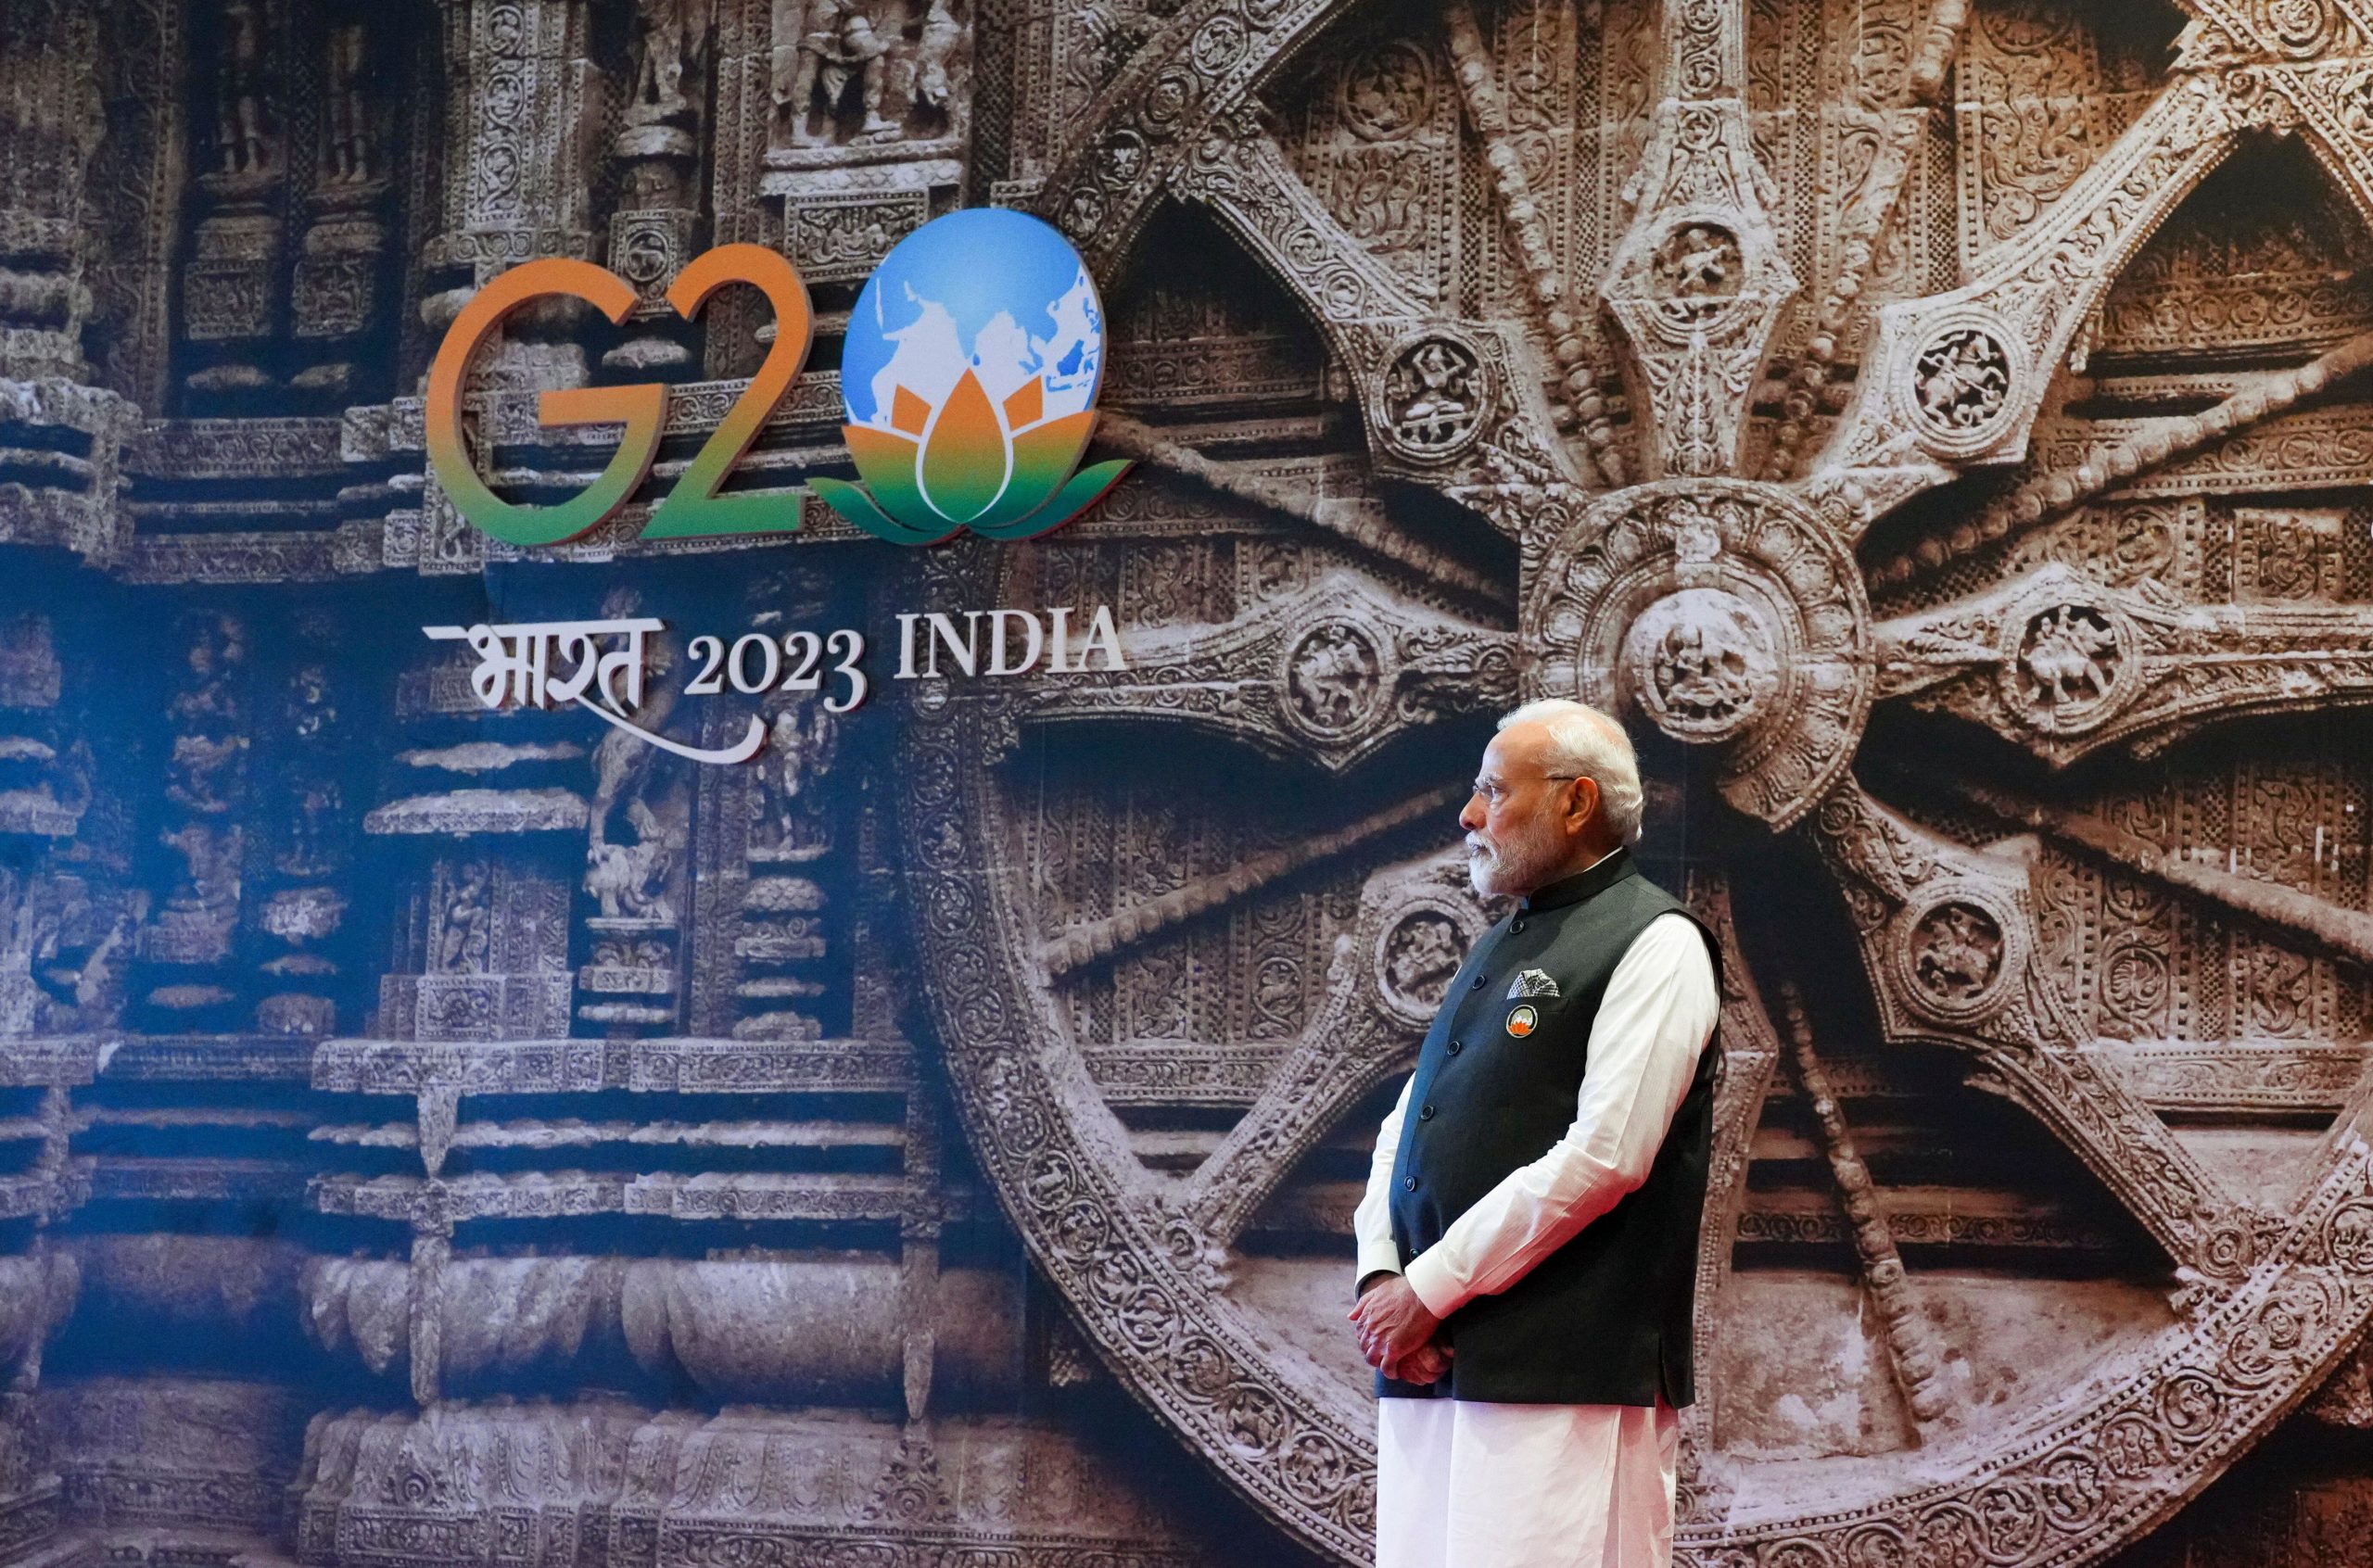 <p>Indian prime minister Narendra Modi waits to officially welcome participants to the G20 Summit in New Delhi, India on Saturday, 9 September, 2023 (Image: Alamy)</p>